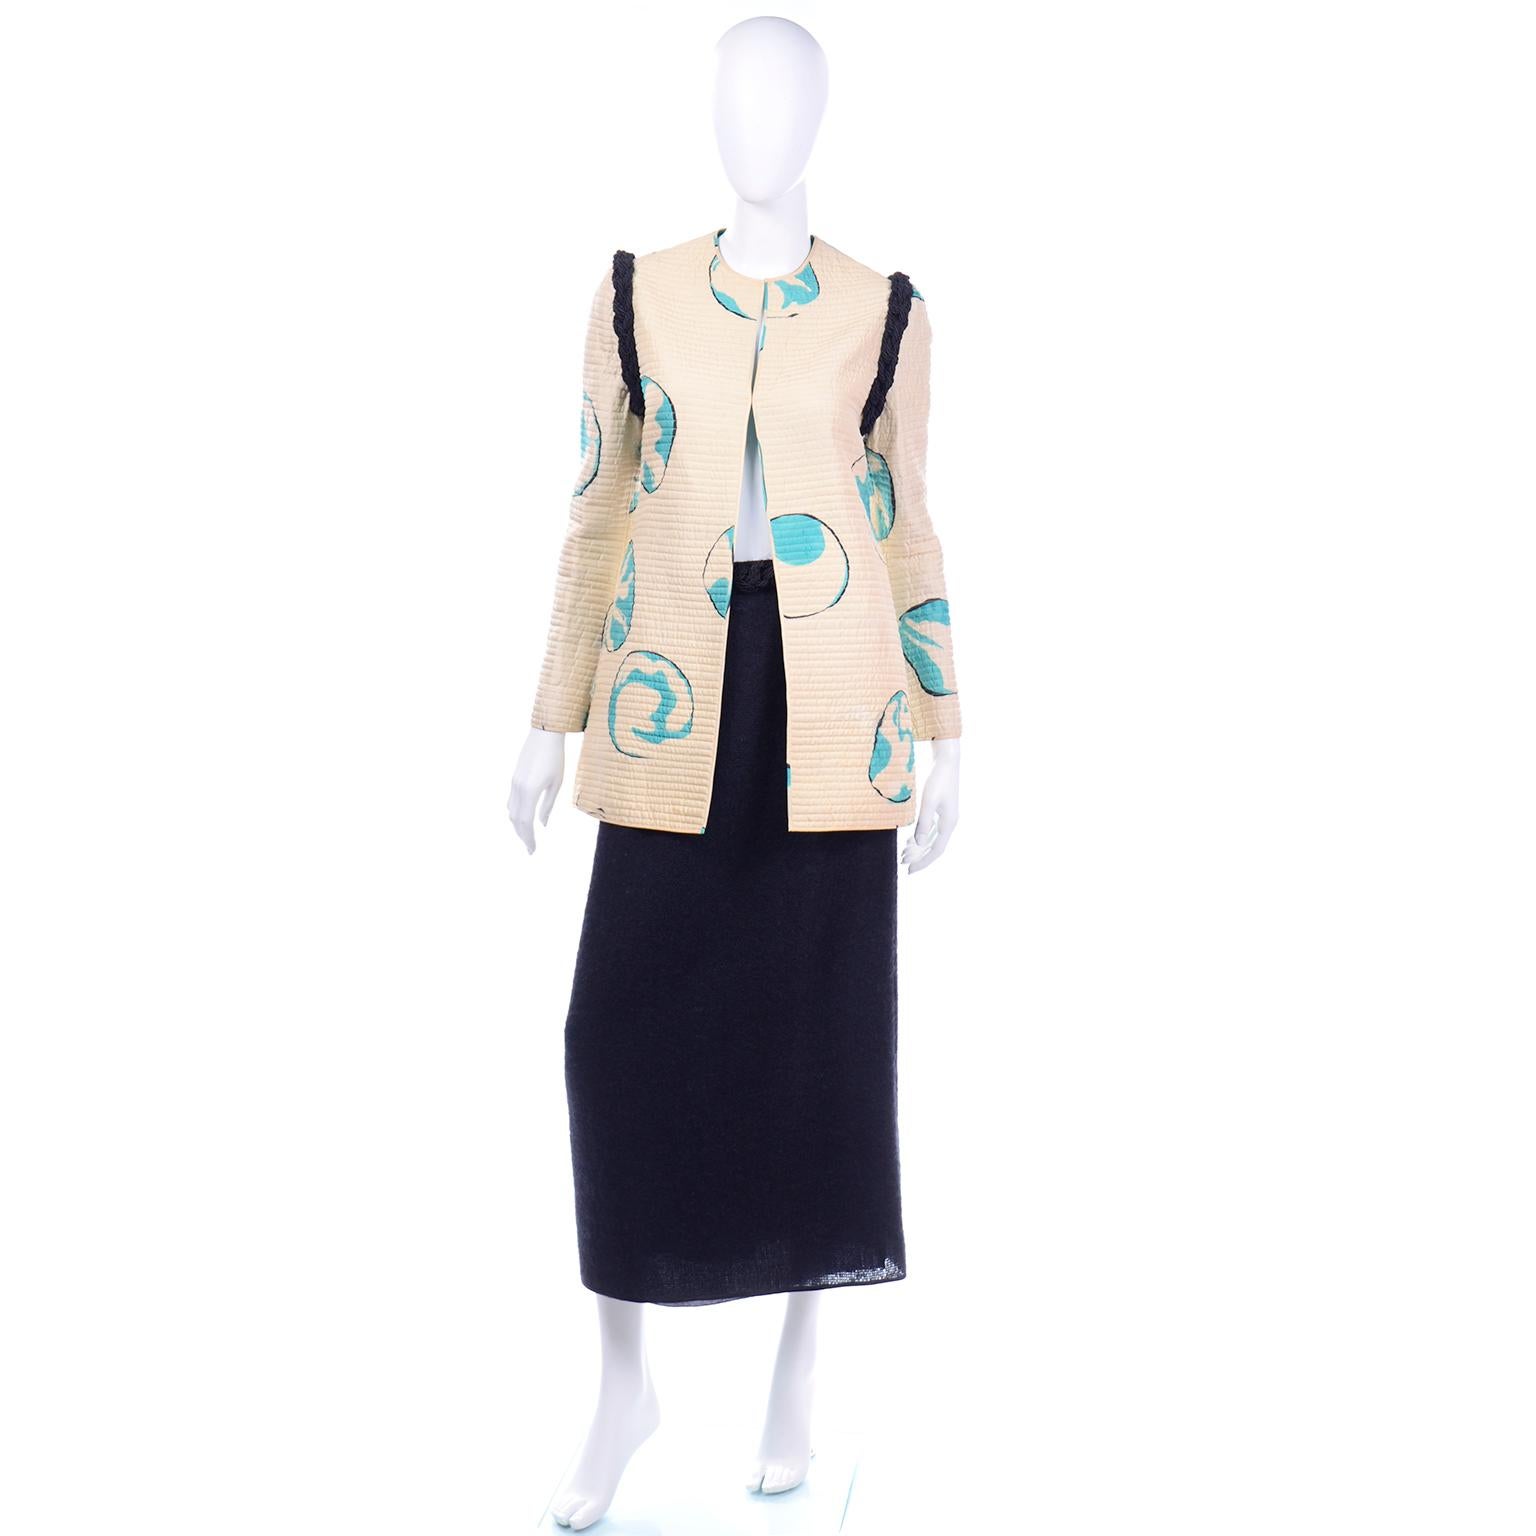 This is a rare vintage late 1970's or early 1980's Mary McFadden skirt suit with a quilted longline hand painted silk jacket. The jacket is cream with blue circles with black outlines that slightly resemble globes. These quilted silk jackets are